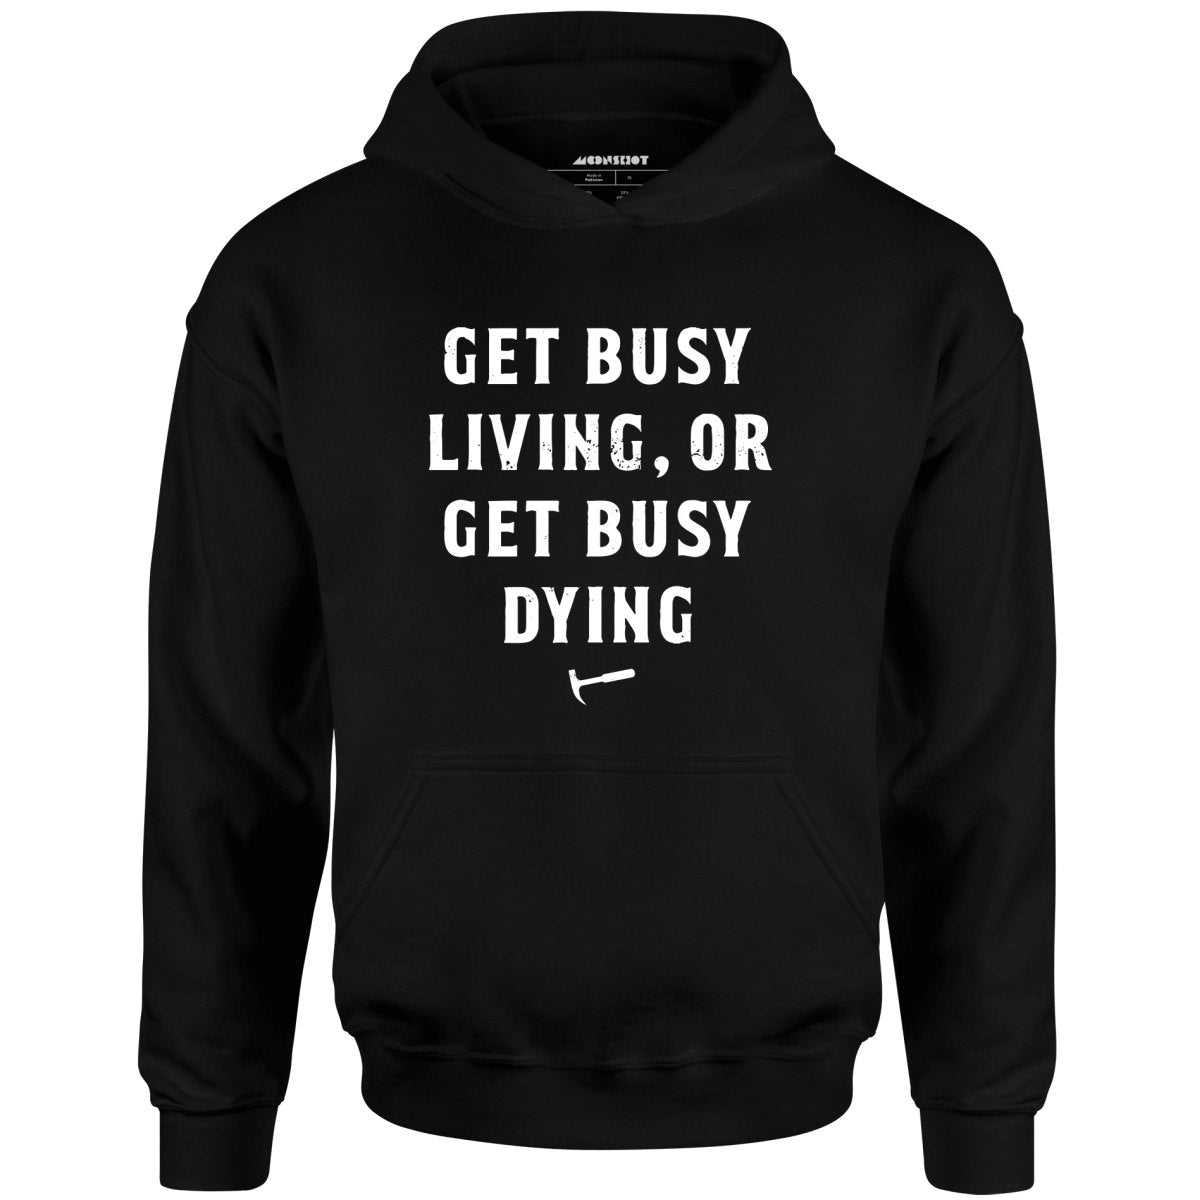 Get Busy Living or Get Busy Dying - Unisex Hoodie